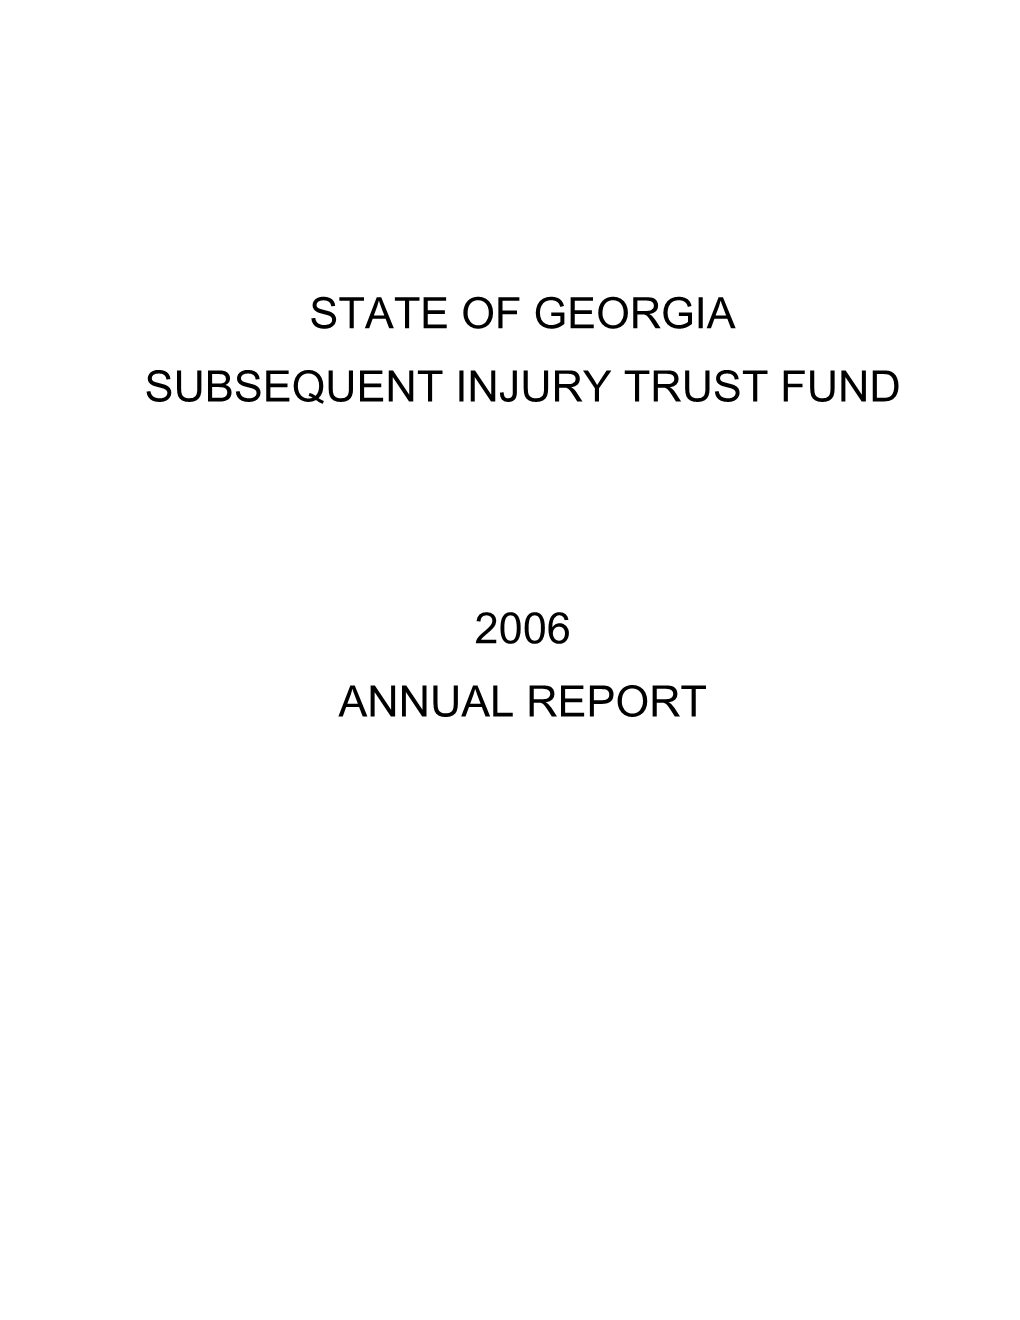 State of Georgia Subsequent Injury Trust Fund